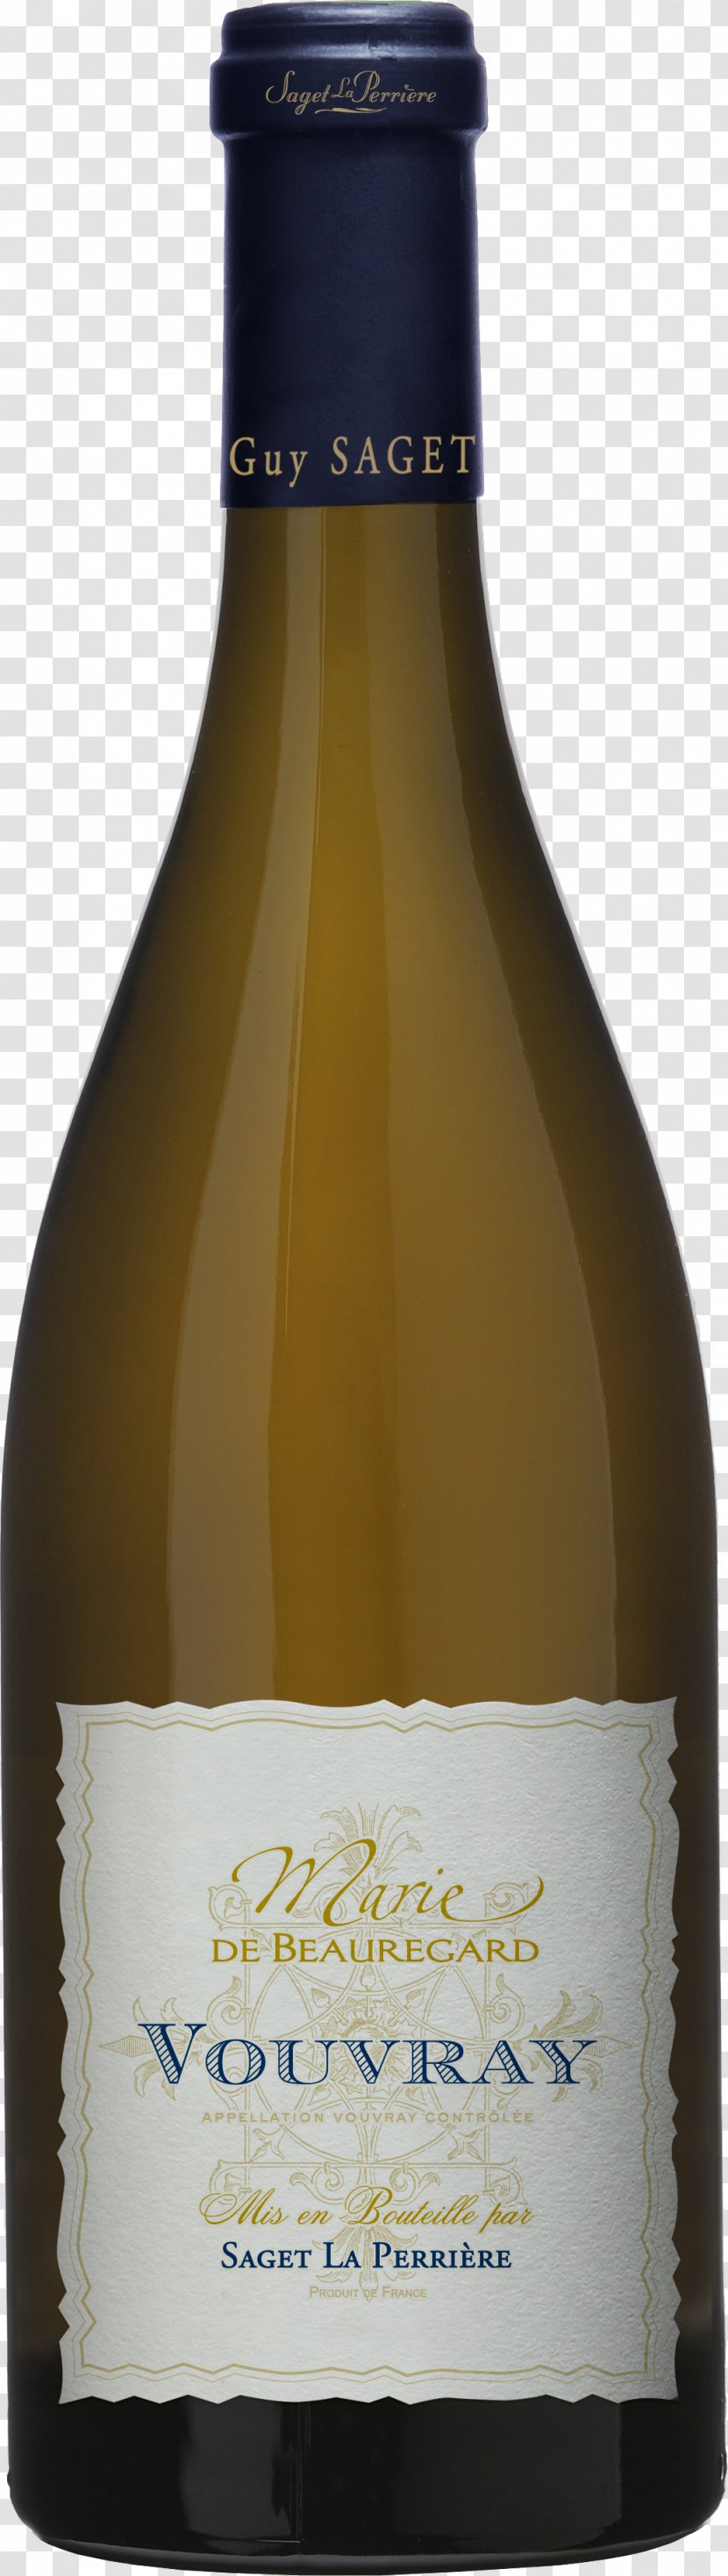 Champagne Vouvray AOC Wine Chinon Transparent PNG